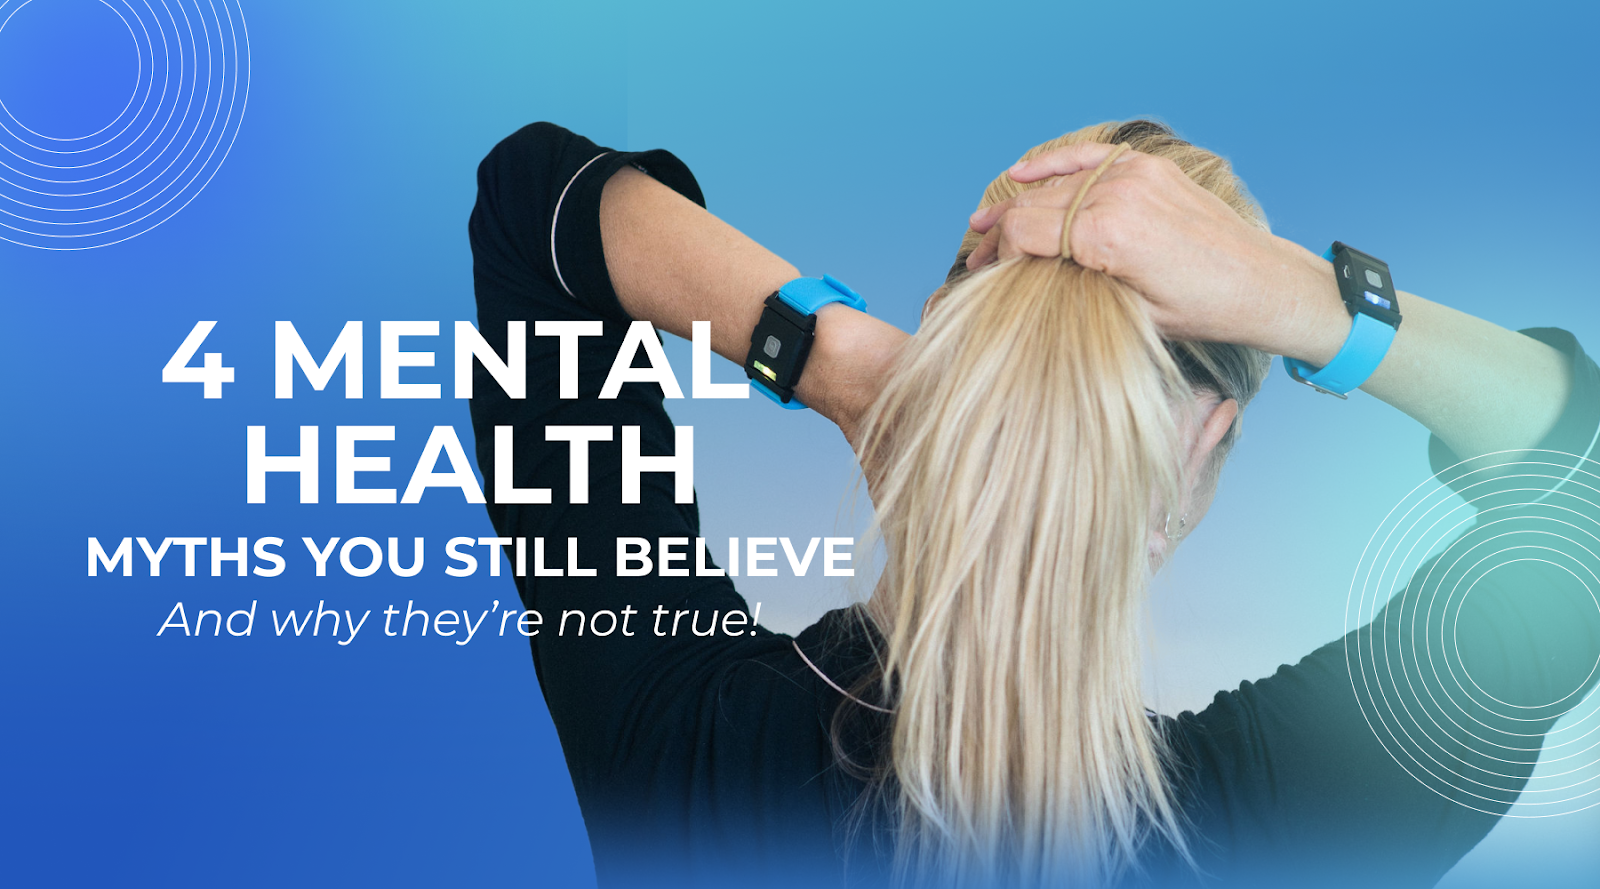 4 Mental Health Myths You Still Believe (And why they're not true!)